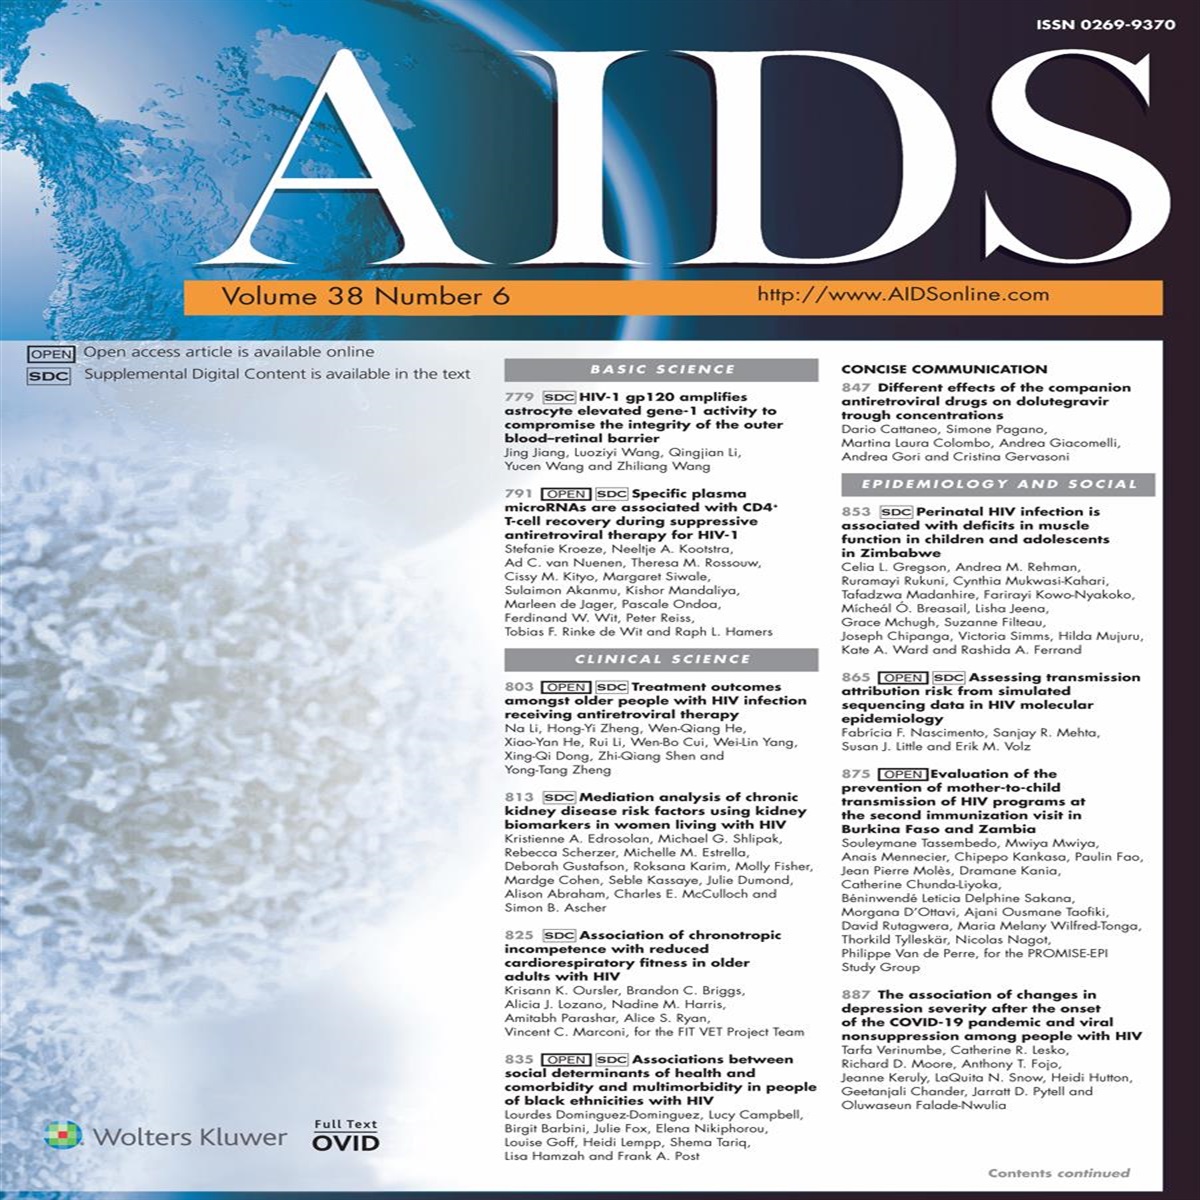 Unmasked Kaposi and sarcoidosis immune reconstitution inflammatory syndrome in a patient with AIDS